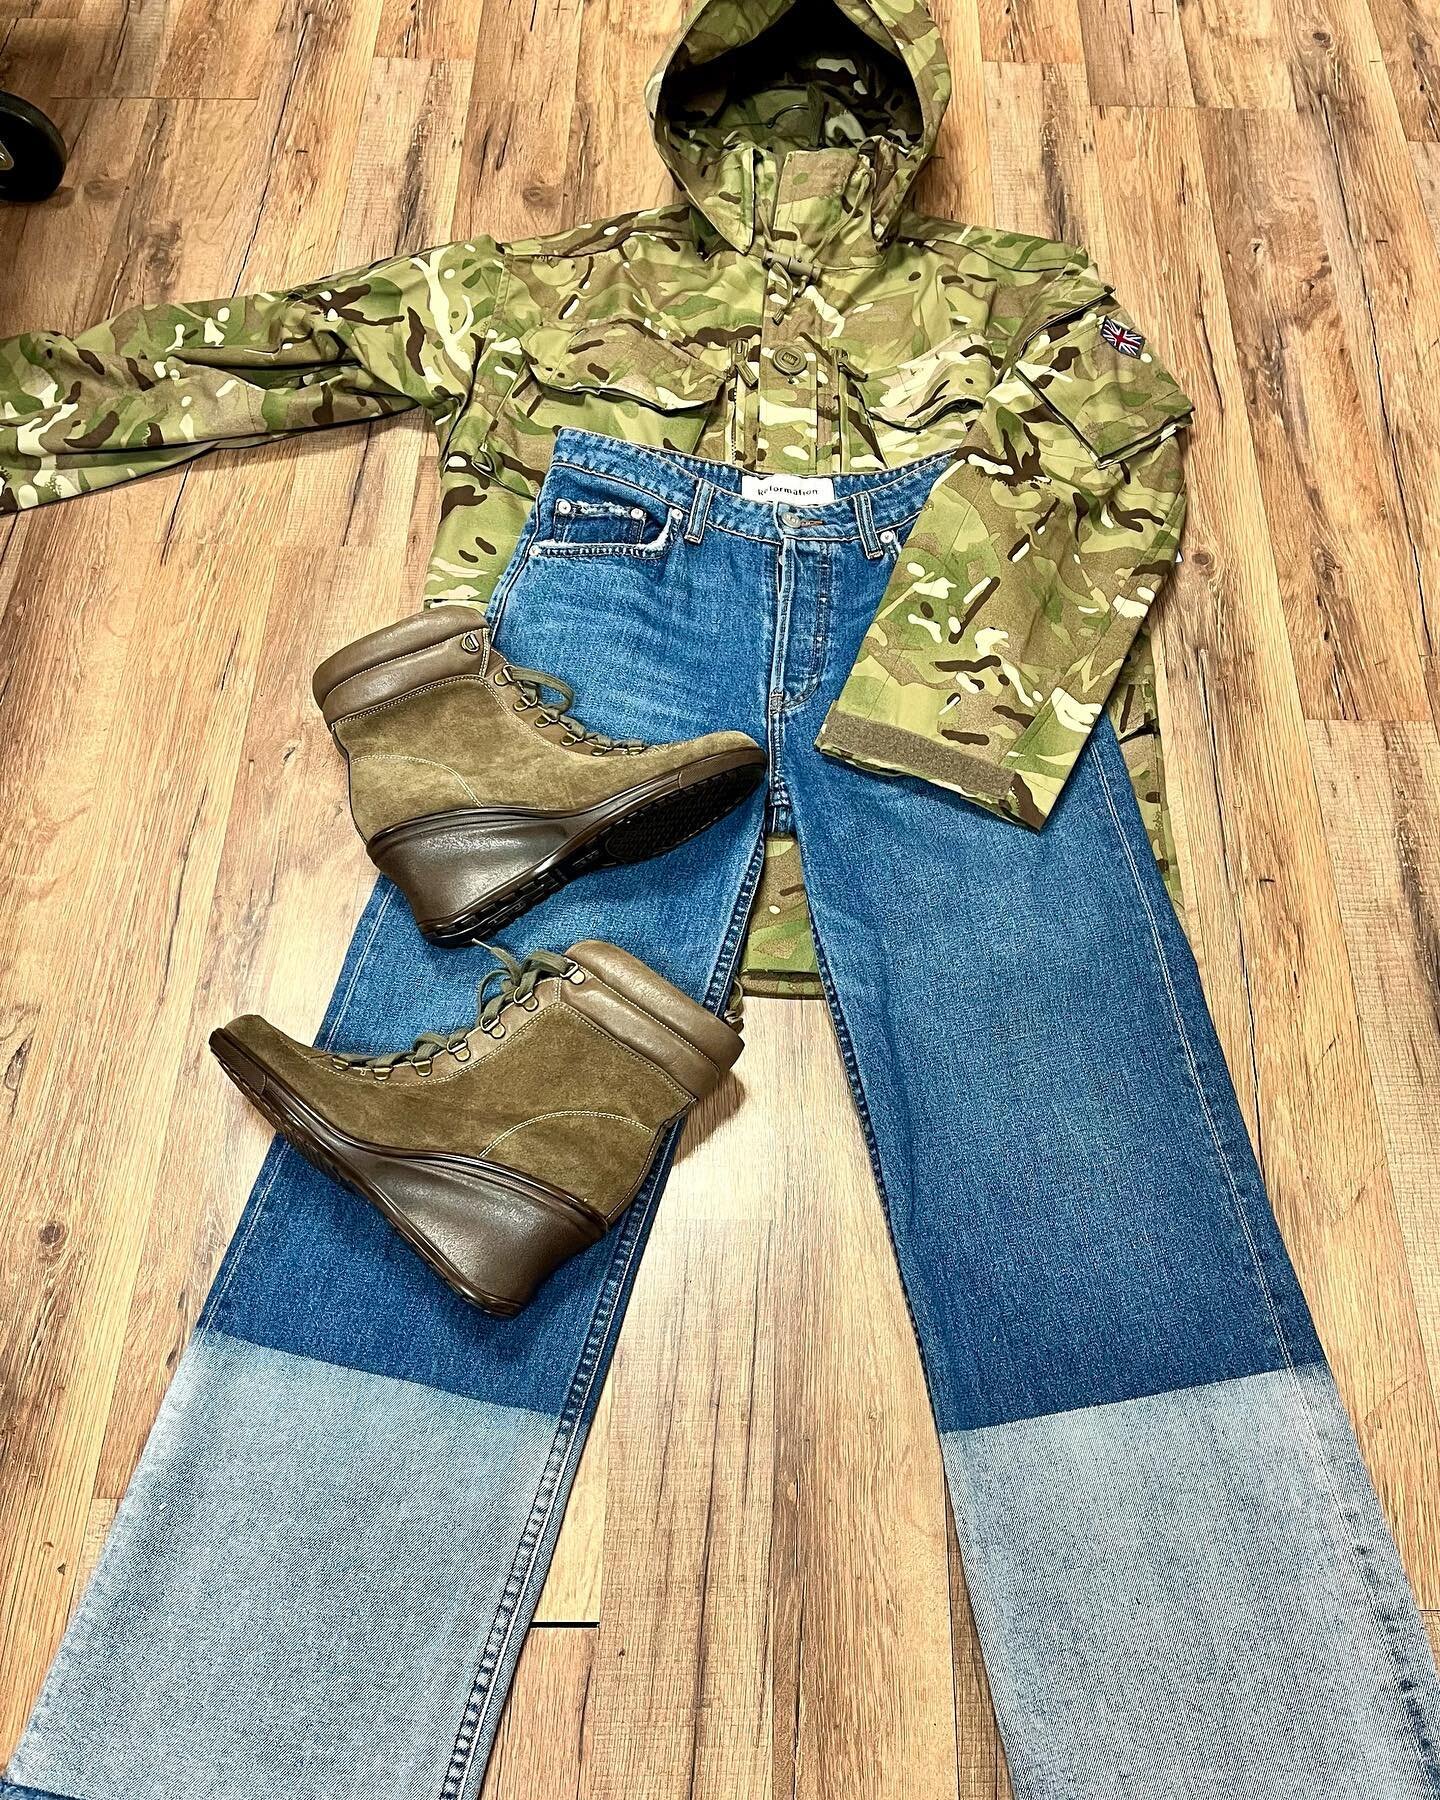 &ldquo;Street Style&rdquo; inspired.  Jeans by @reformation sz.27 $29 @armysurpluswarehouse jacket sz. large $42 @aerosoles wedge sz. 10 $39.50
.
.
#uptownattic #deesignerconsignment #consignmentboutique #consignment #thrifting #thriftstorefinds #thr